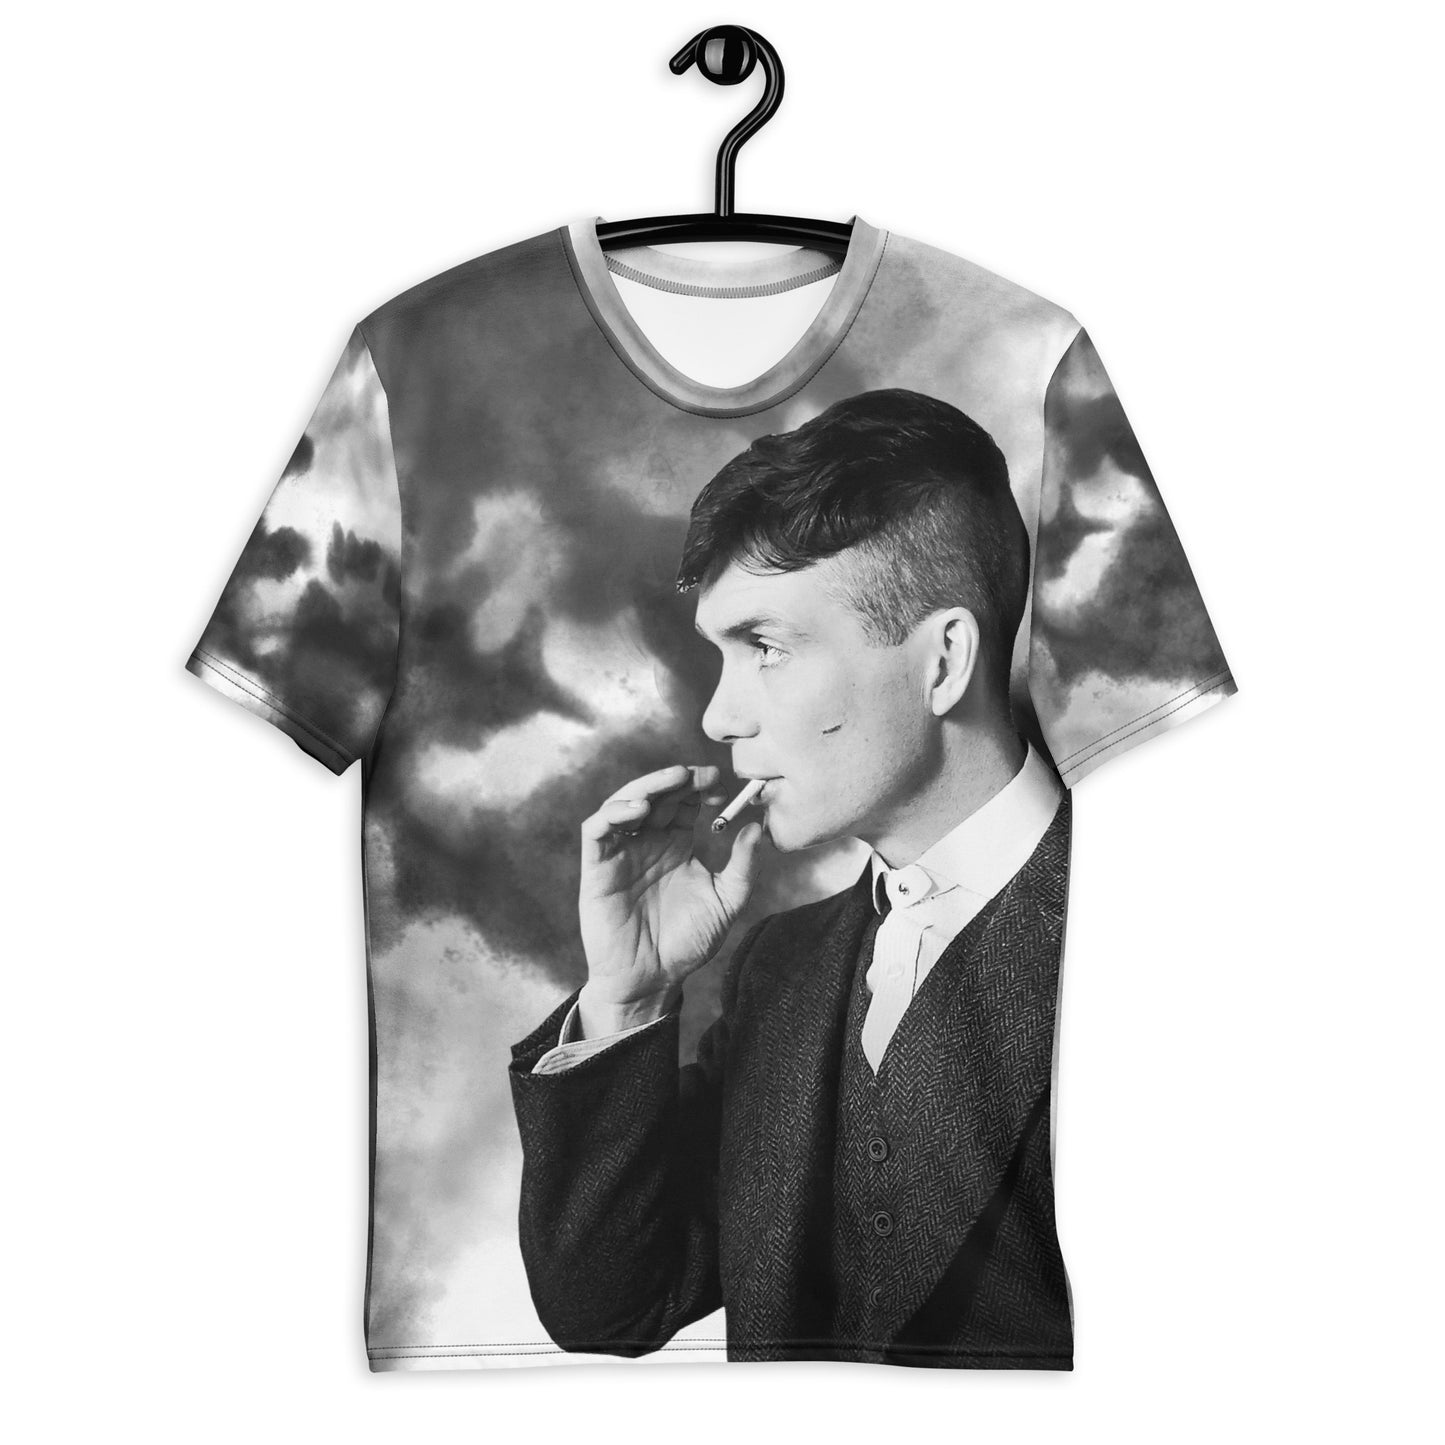 Peaky Blinders Tommy KiSS t-shirt - Cillian Murphy Shelby TV show inspired